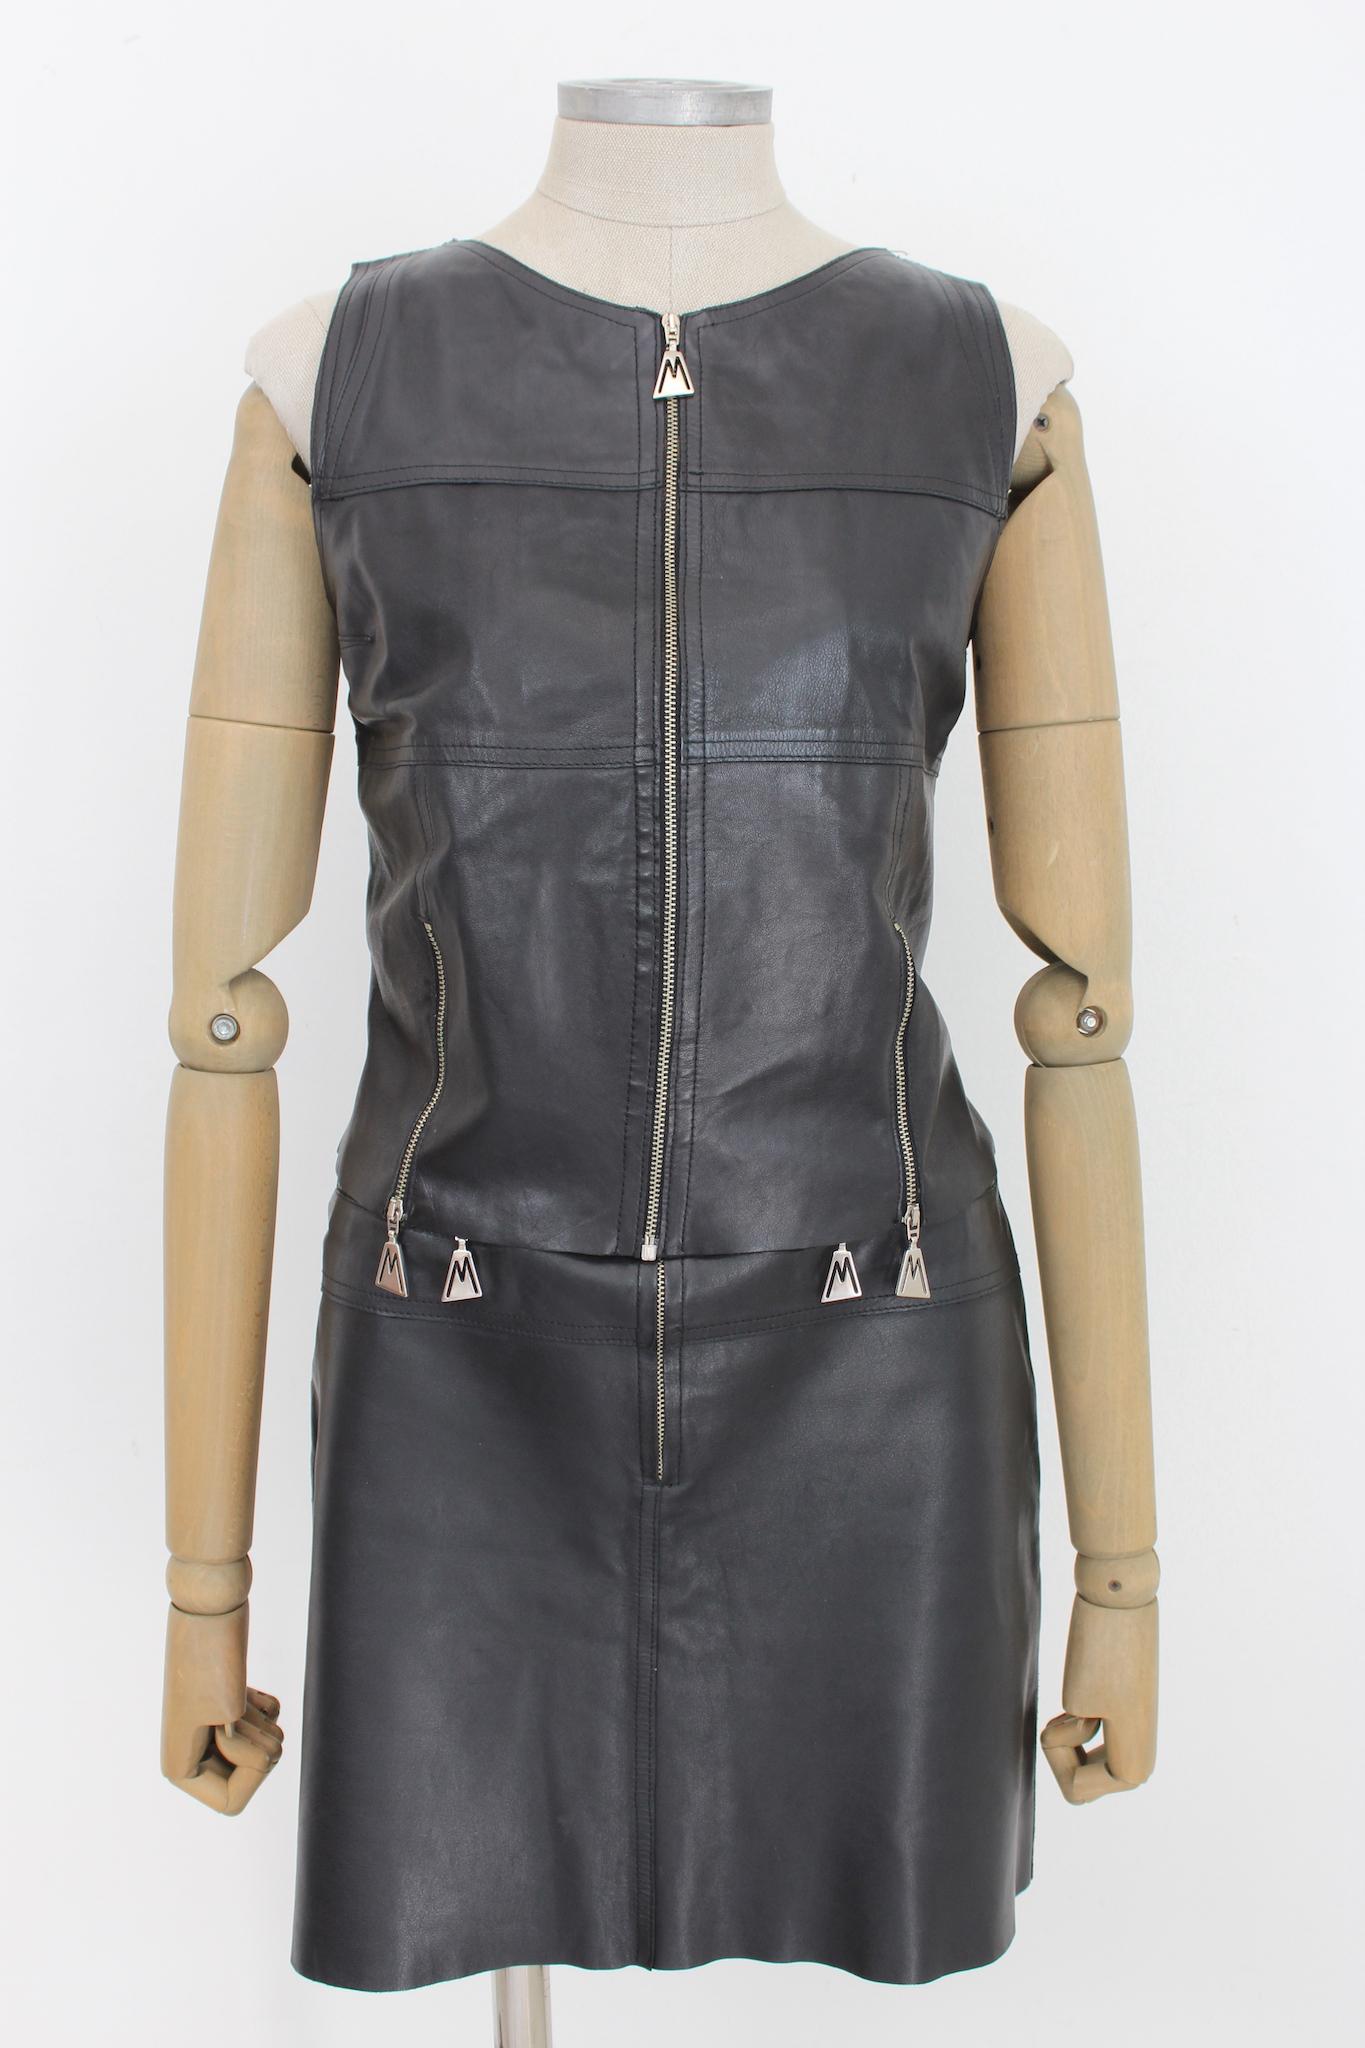 80s vintage black leather suit by designer Claude Montana. Biker-style vest and skirt in soft leather with logoed zips. Flared skirt with raw cut, fitted vest, internally lined. Made in Italy.

Size: 42 It 8 Us 10 Uk

Shoulder: 34 cm
Bust / Chest: